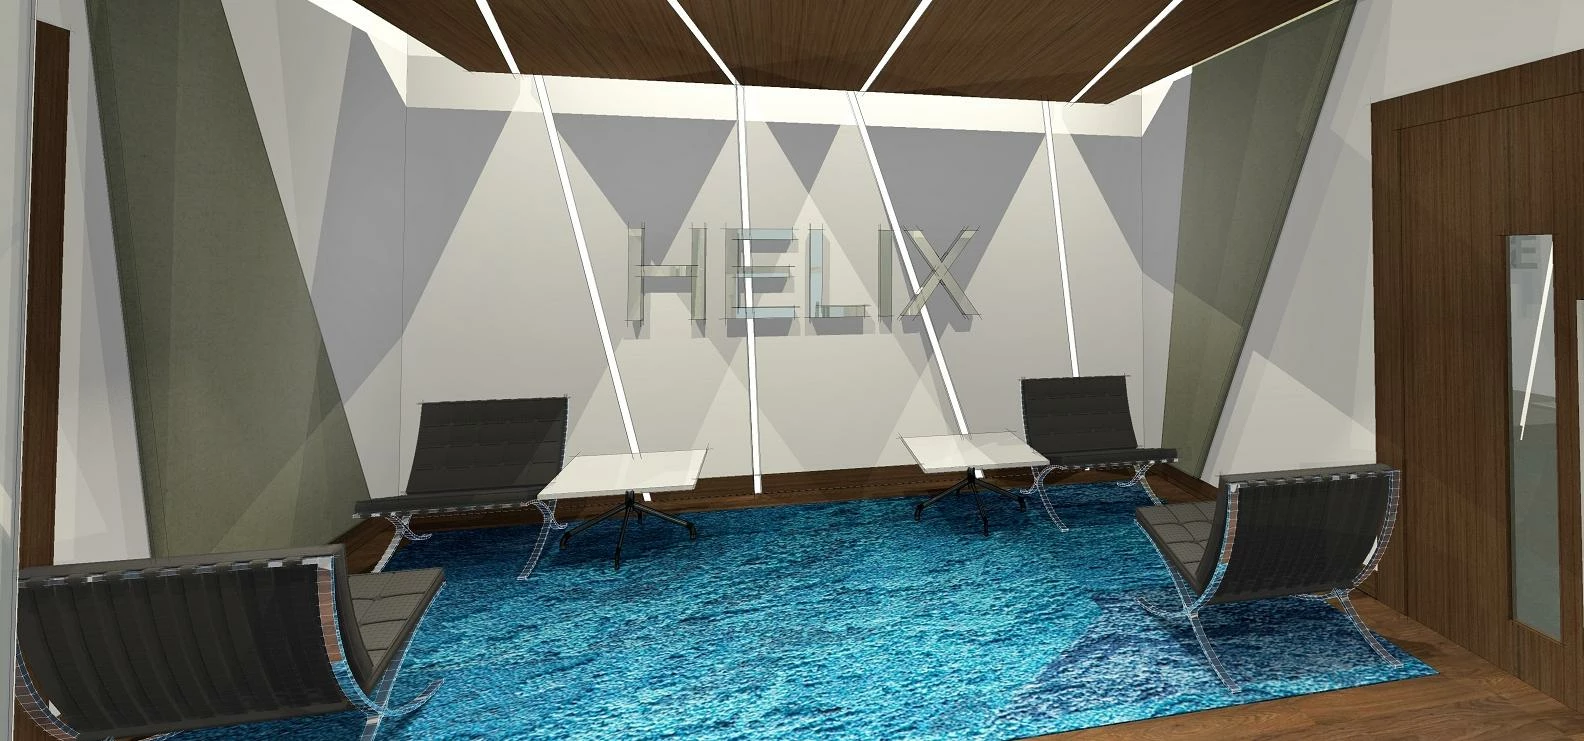 A CGI of break-out space in the Helix building